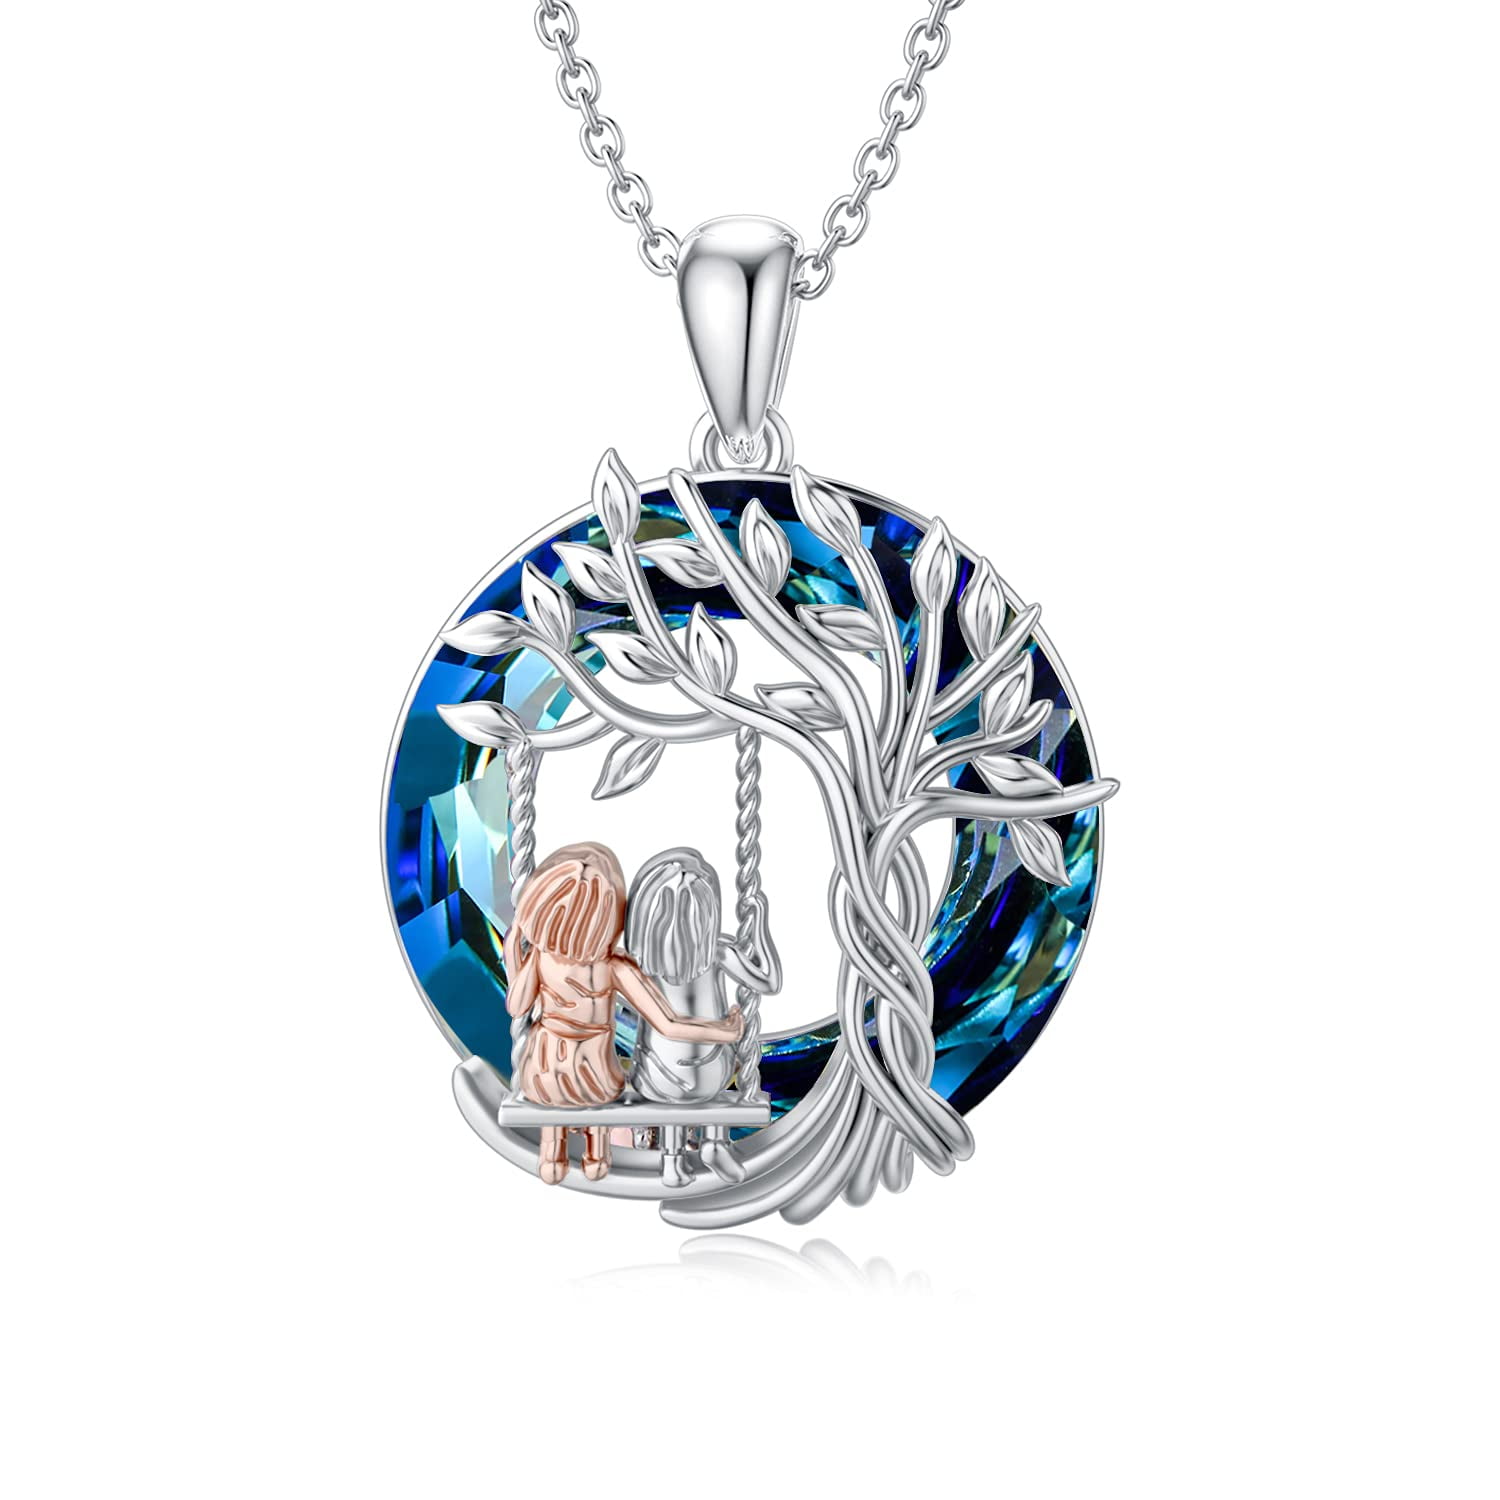 WINNICACA Valentines Day Gifts Sisters S925 Sterling Silver Tree Life Sister Necklaces 2 Blue Crystal Friendship Necklace Jewelry Women Best Friend G 45d445c7 c849 46f0 a13d cf3e9e3e9eb4.72b014fca721632ff453b2cd5d5e215b